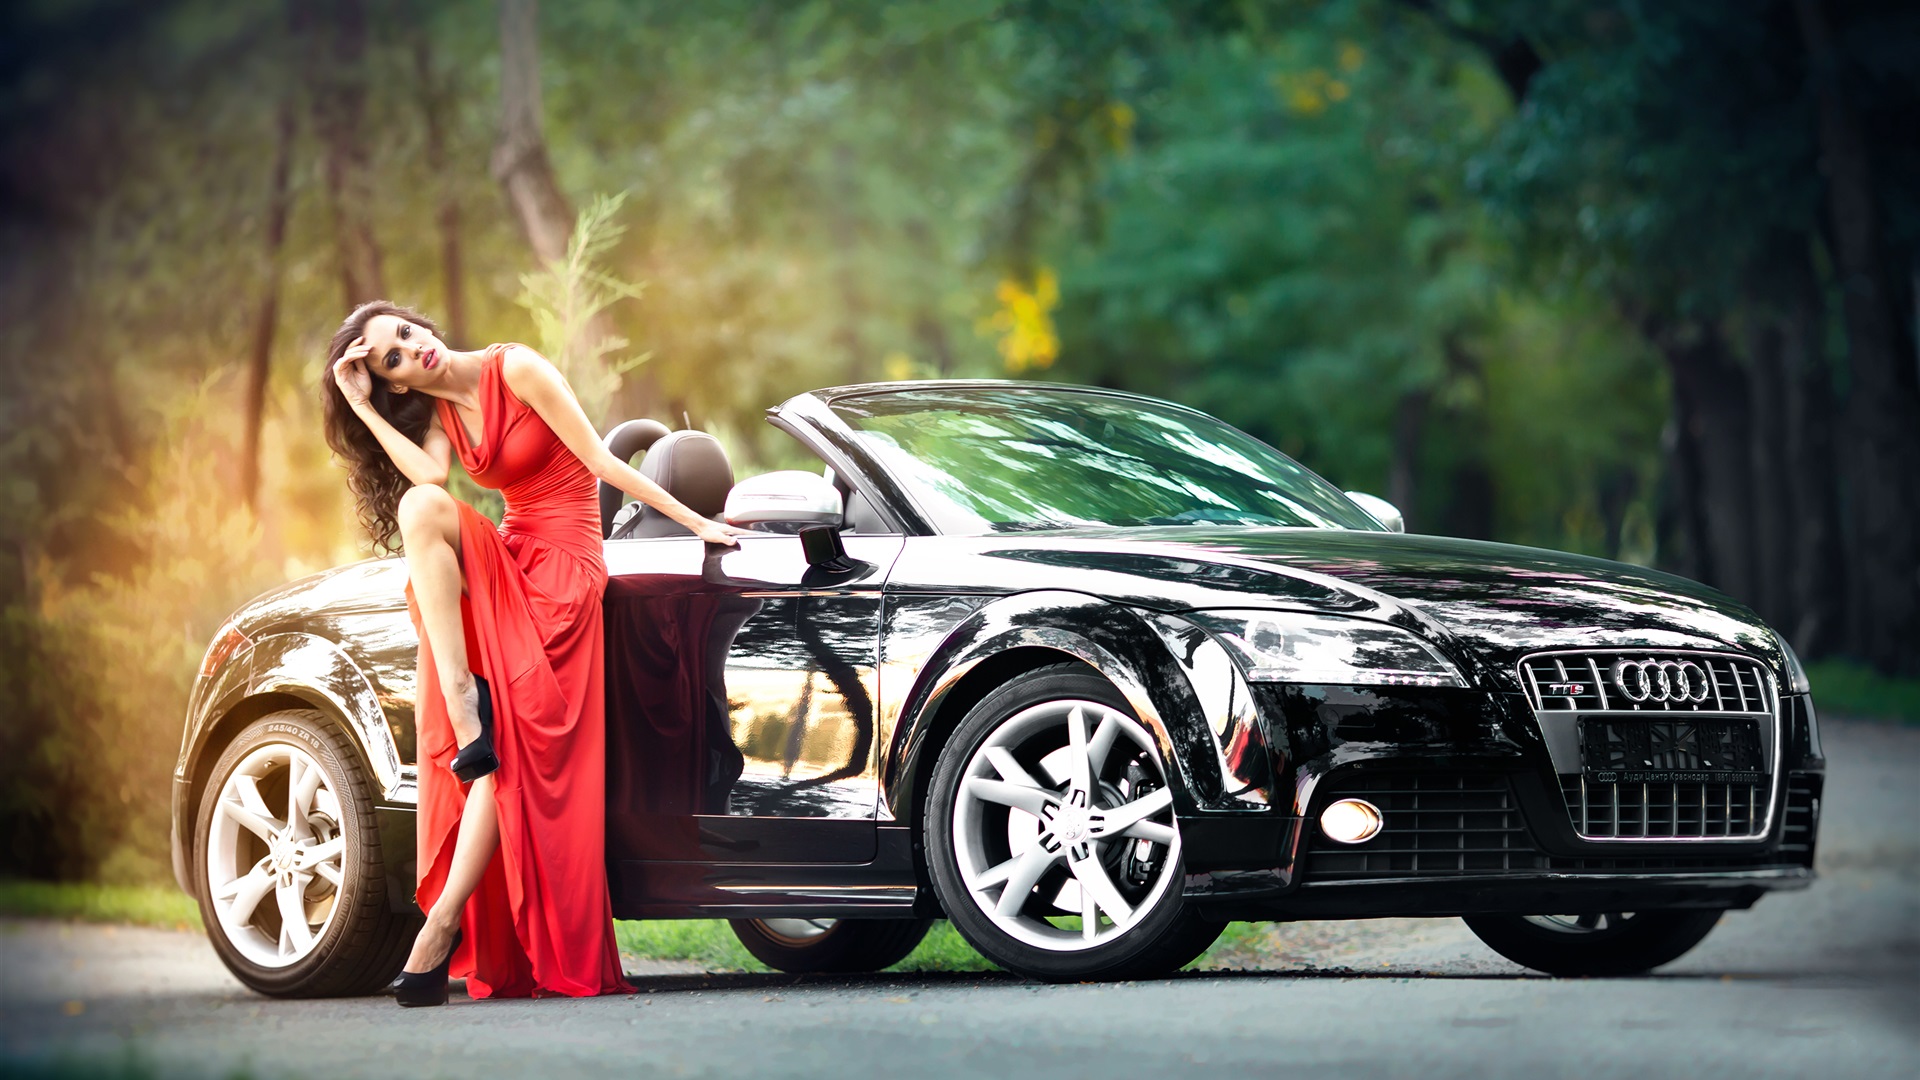 Wallpaper Red Dress Girl And Black Audi Car HD Picture